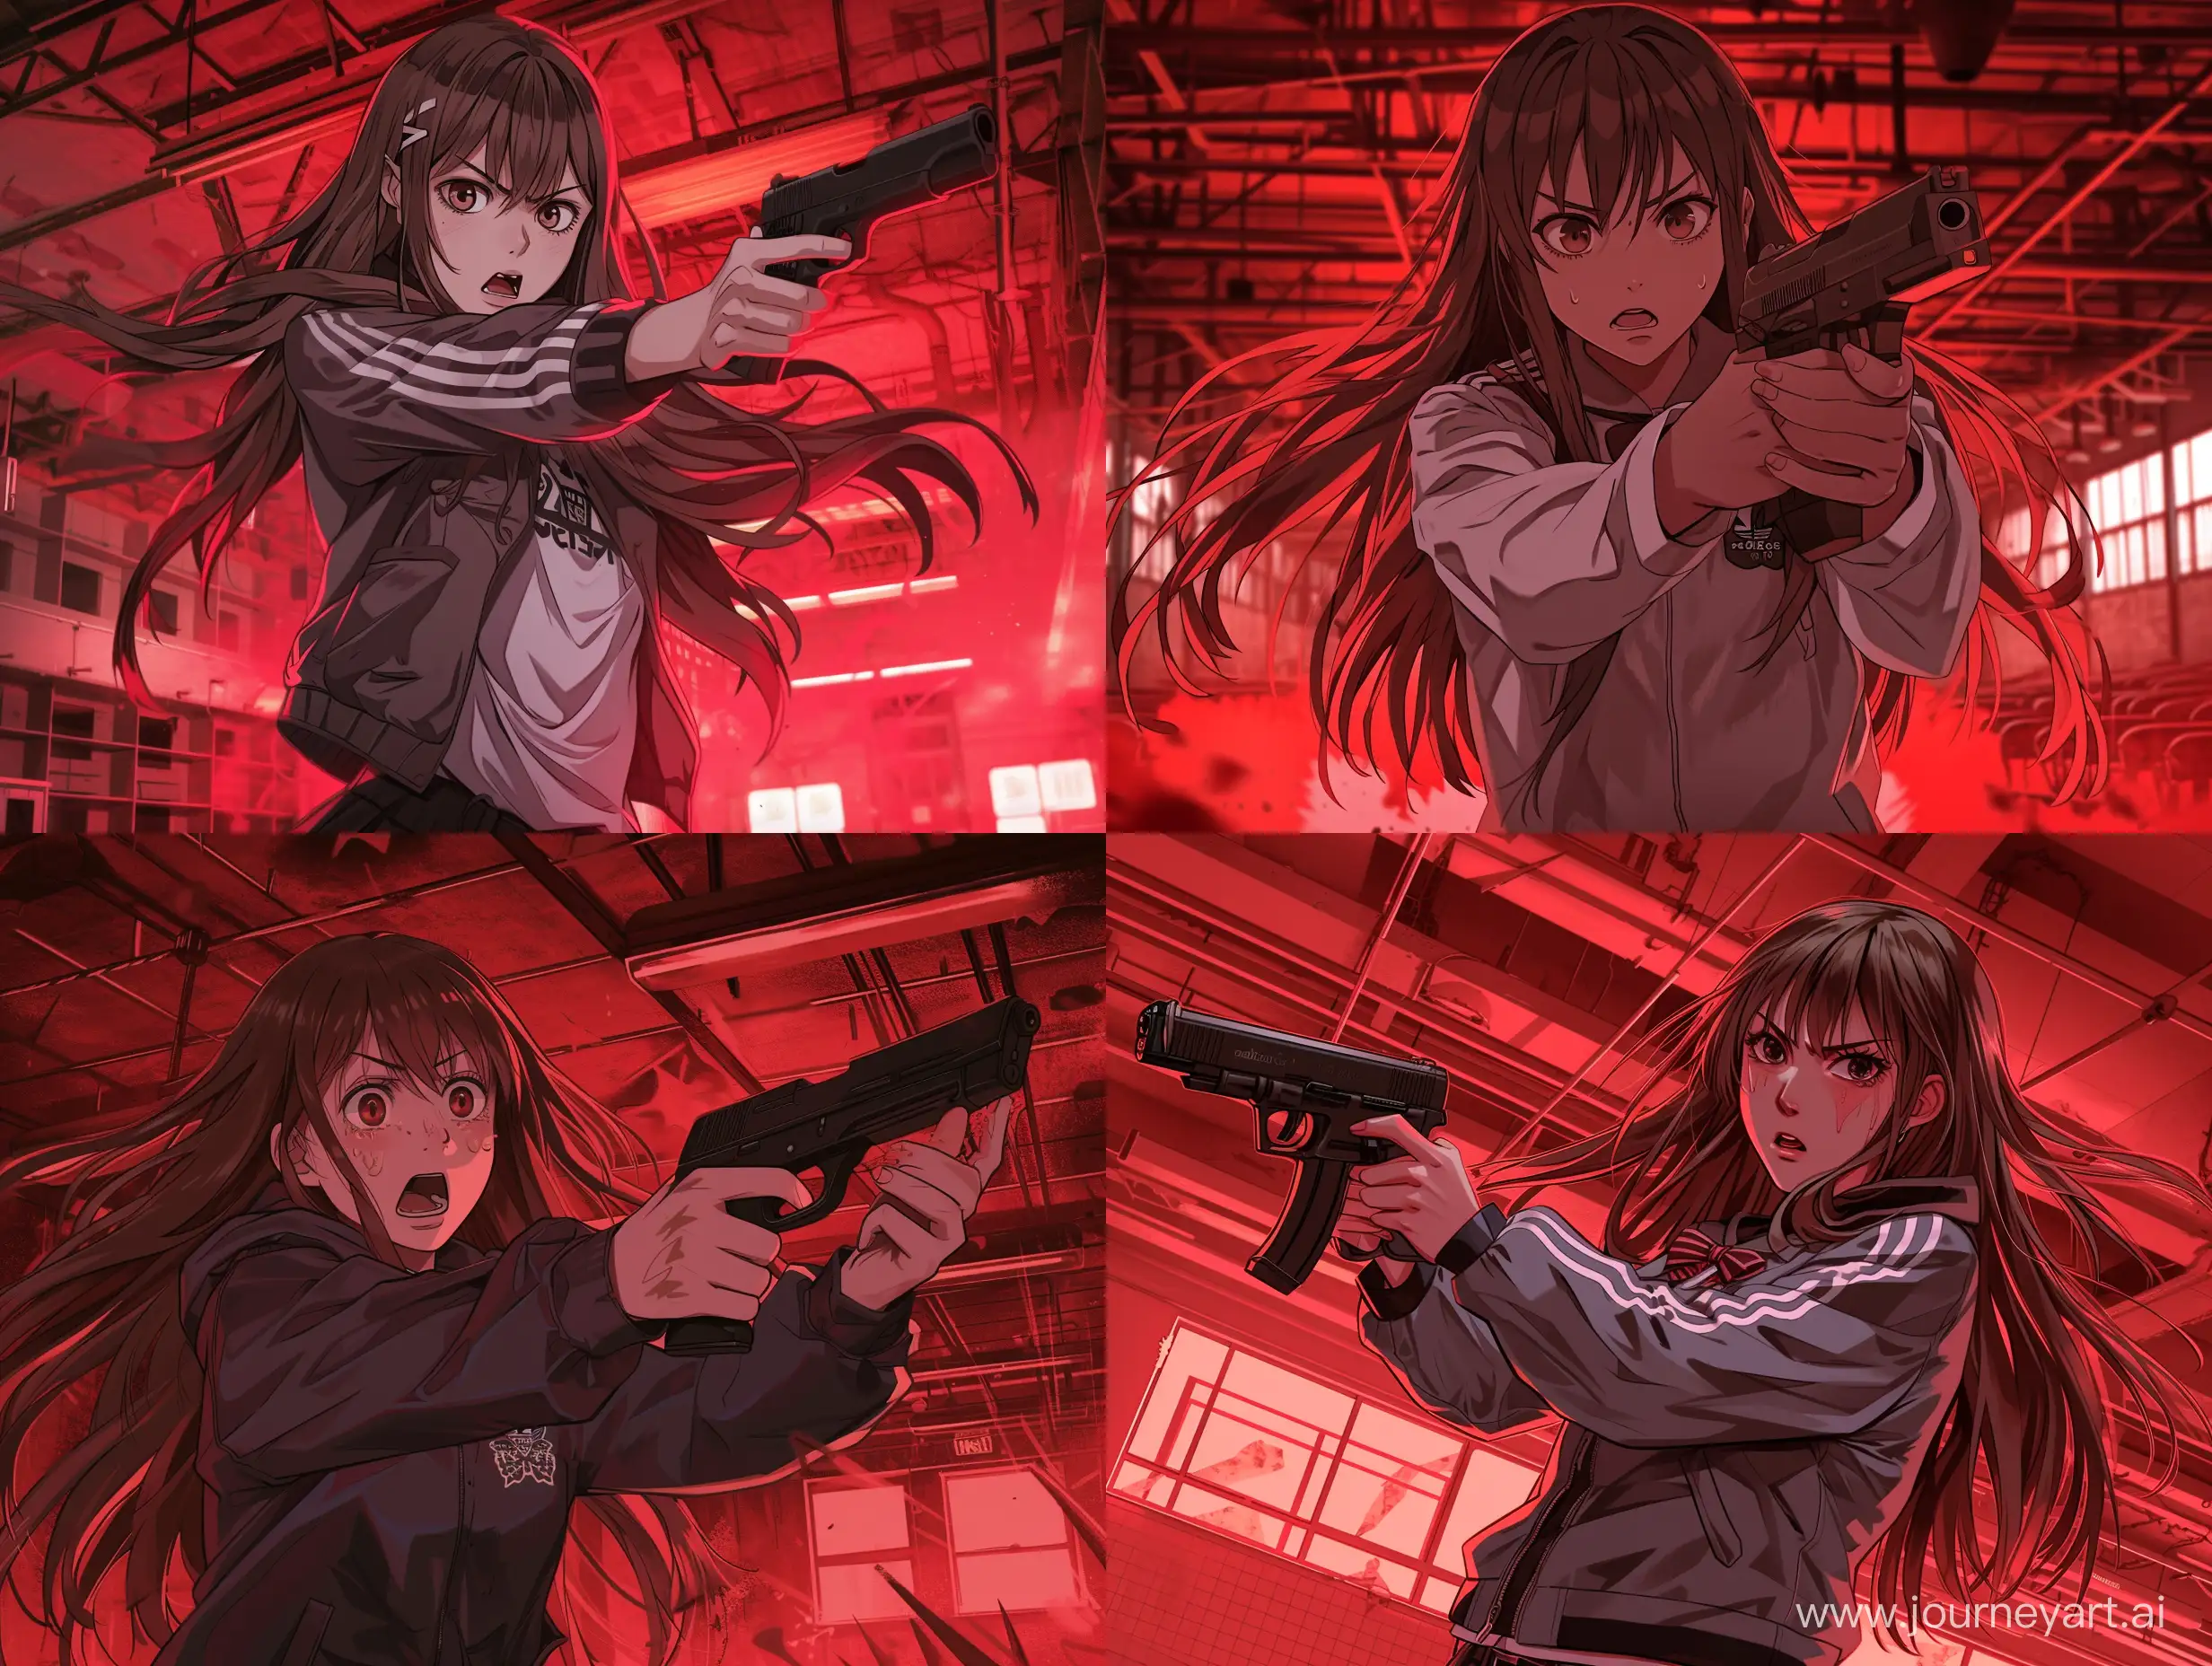 a russian girl of 16-17 years old with long brown loose hair in a school uniform and an adidas windbreaker with a gun in his hands and an anxious expression on his face, she is in an abandoned school, red creepy lighting, anime style